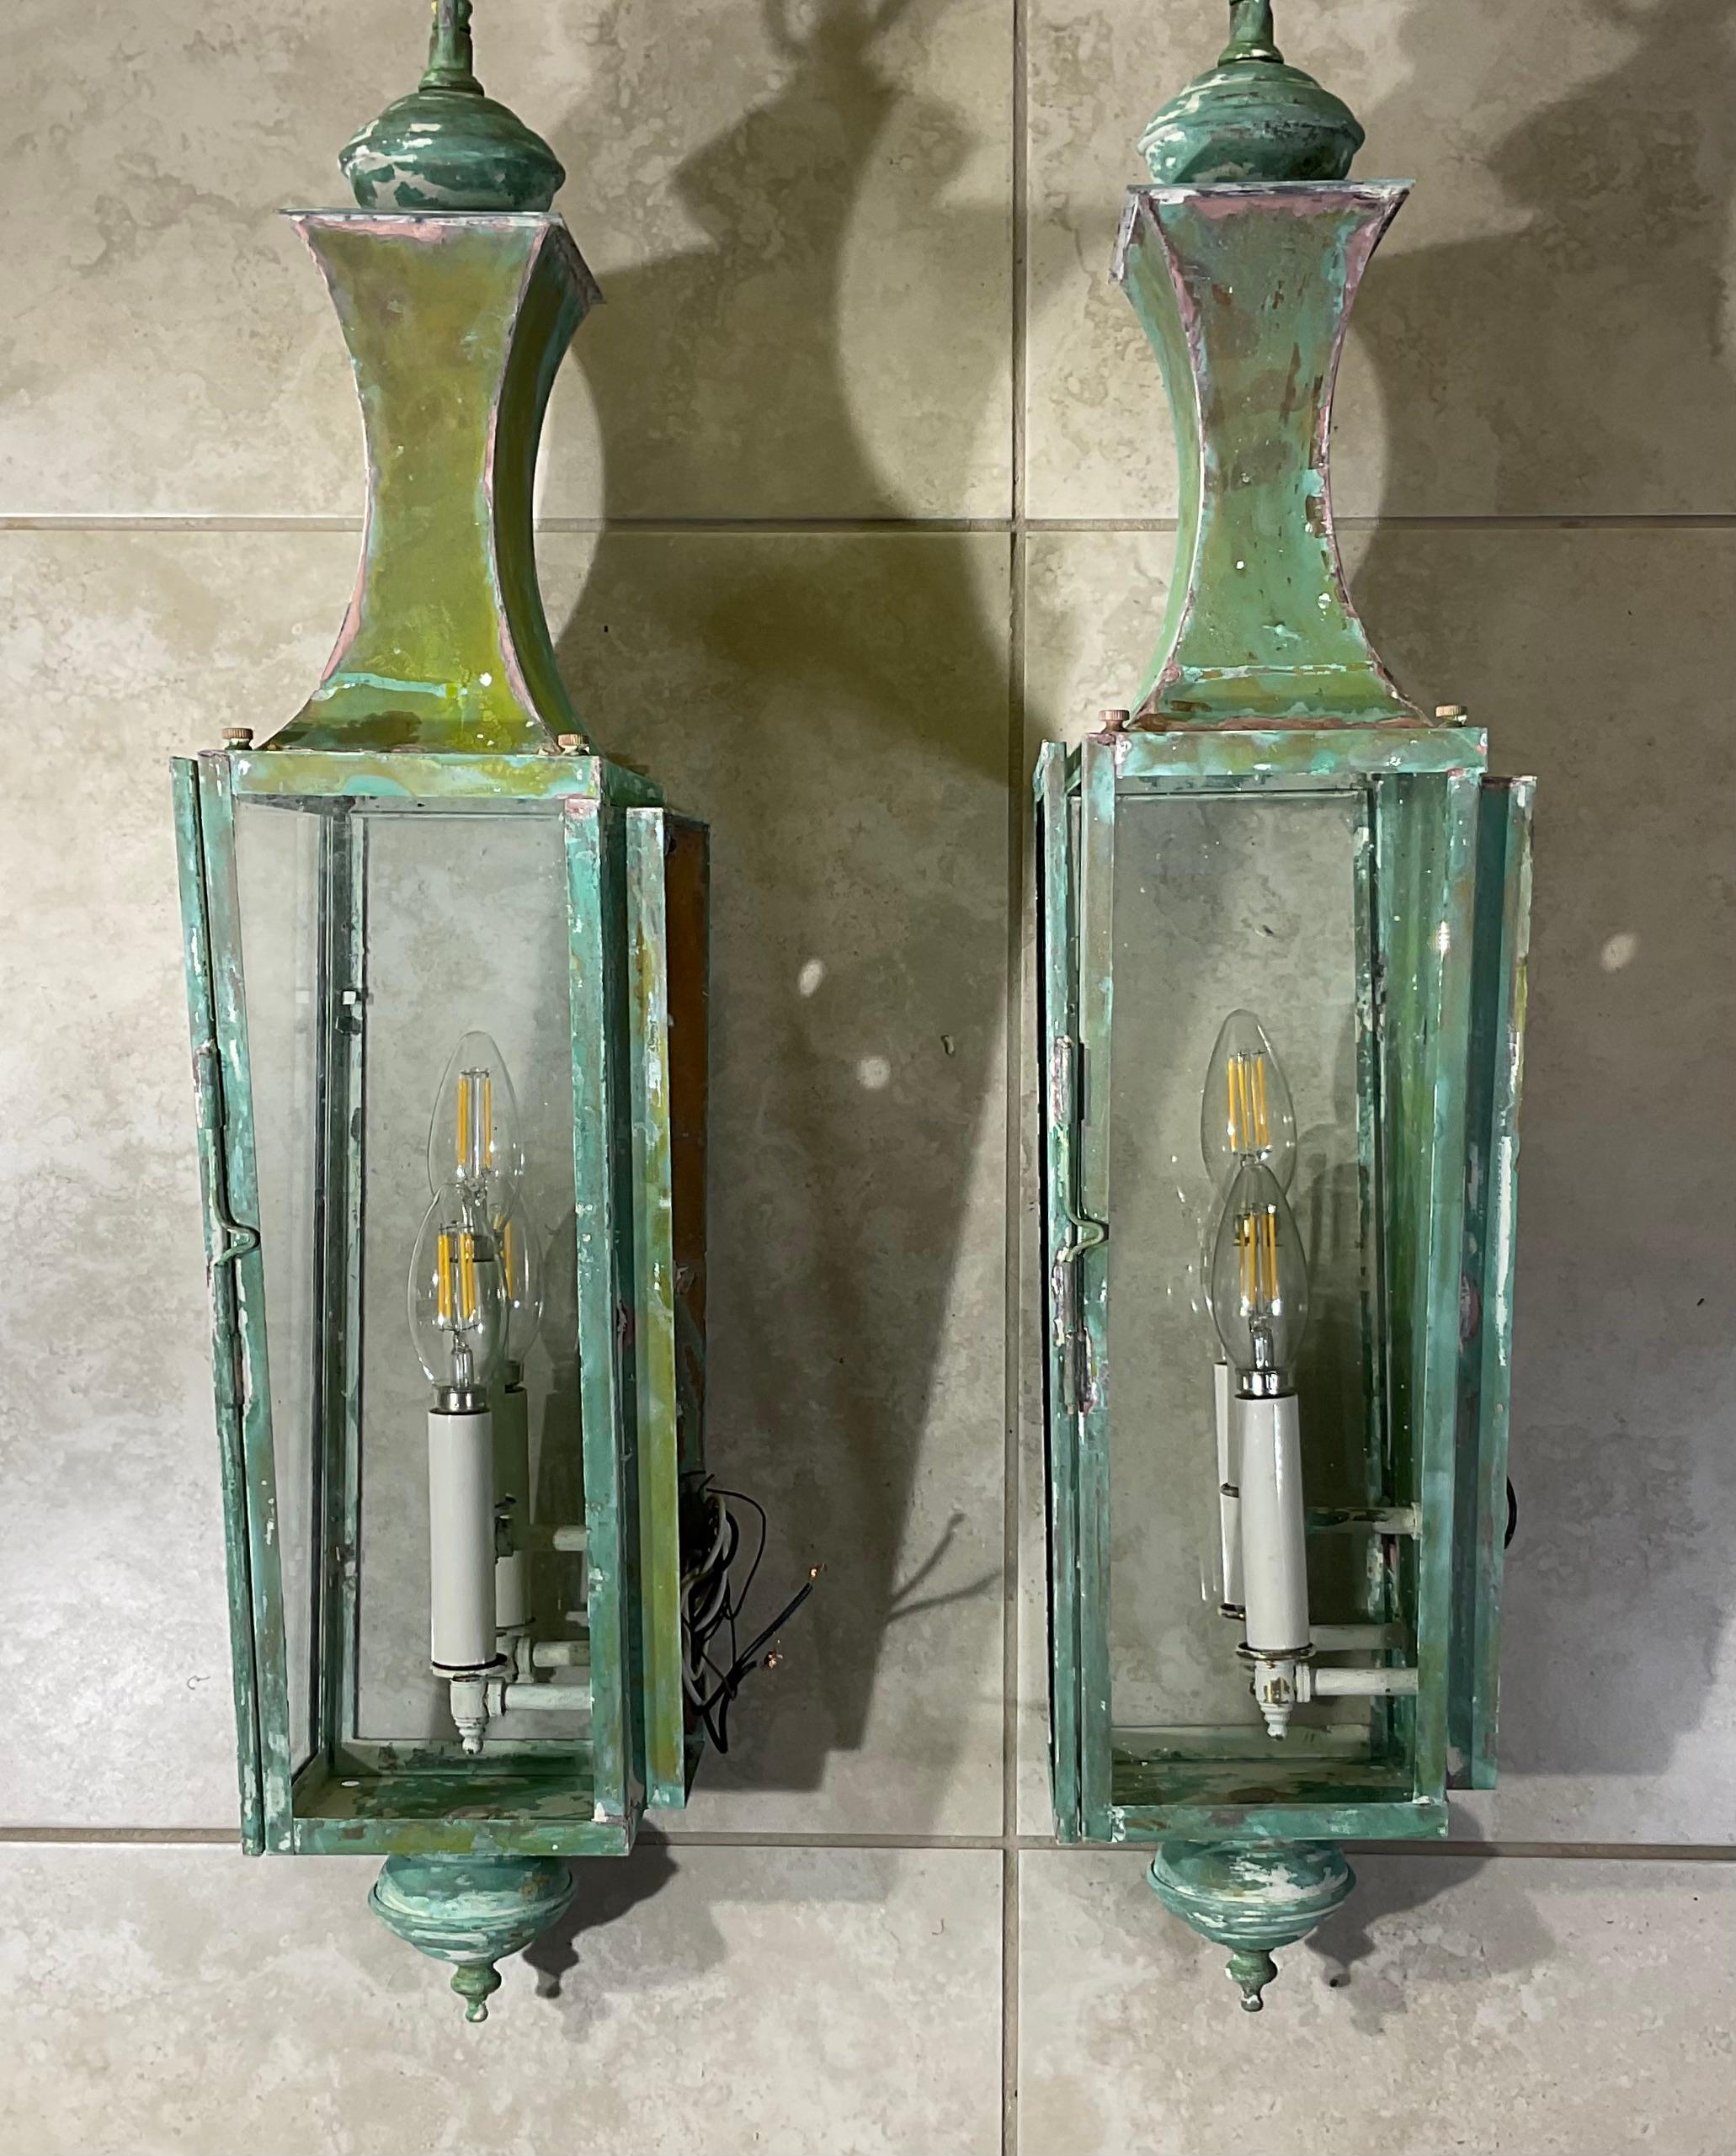 Elegant Pair of  wall hanging lantern , hand crafted from solid copper , with three 60/watt light each lantern , beautiful green patina .
Suitable for wet locations, made in the US .